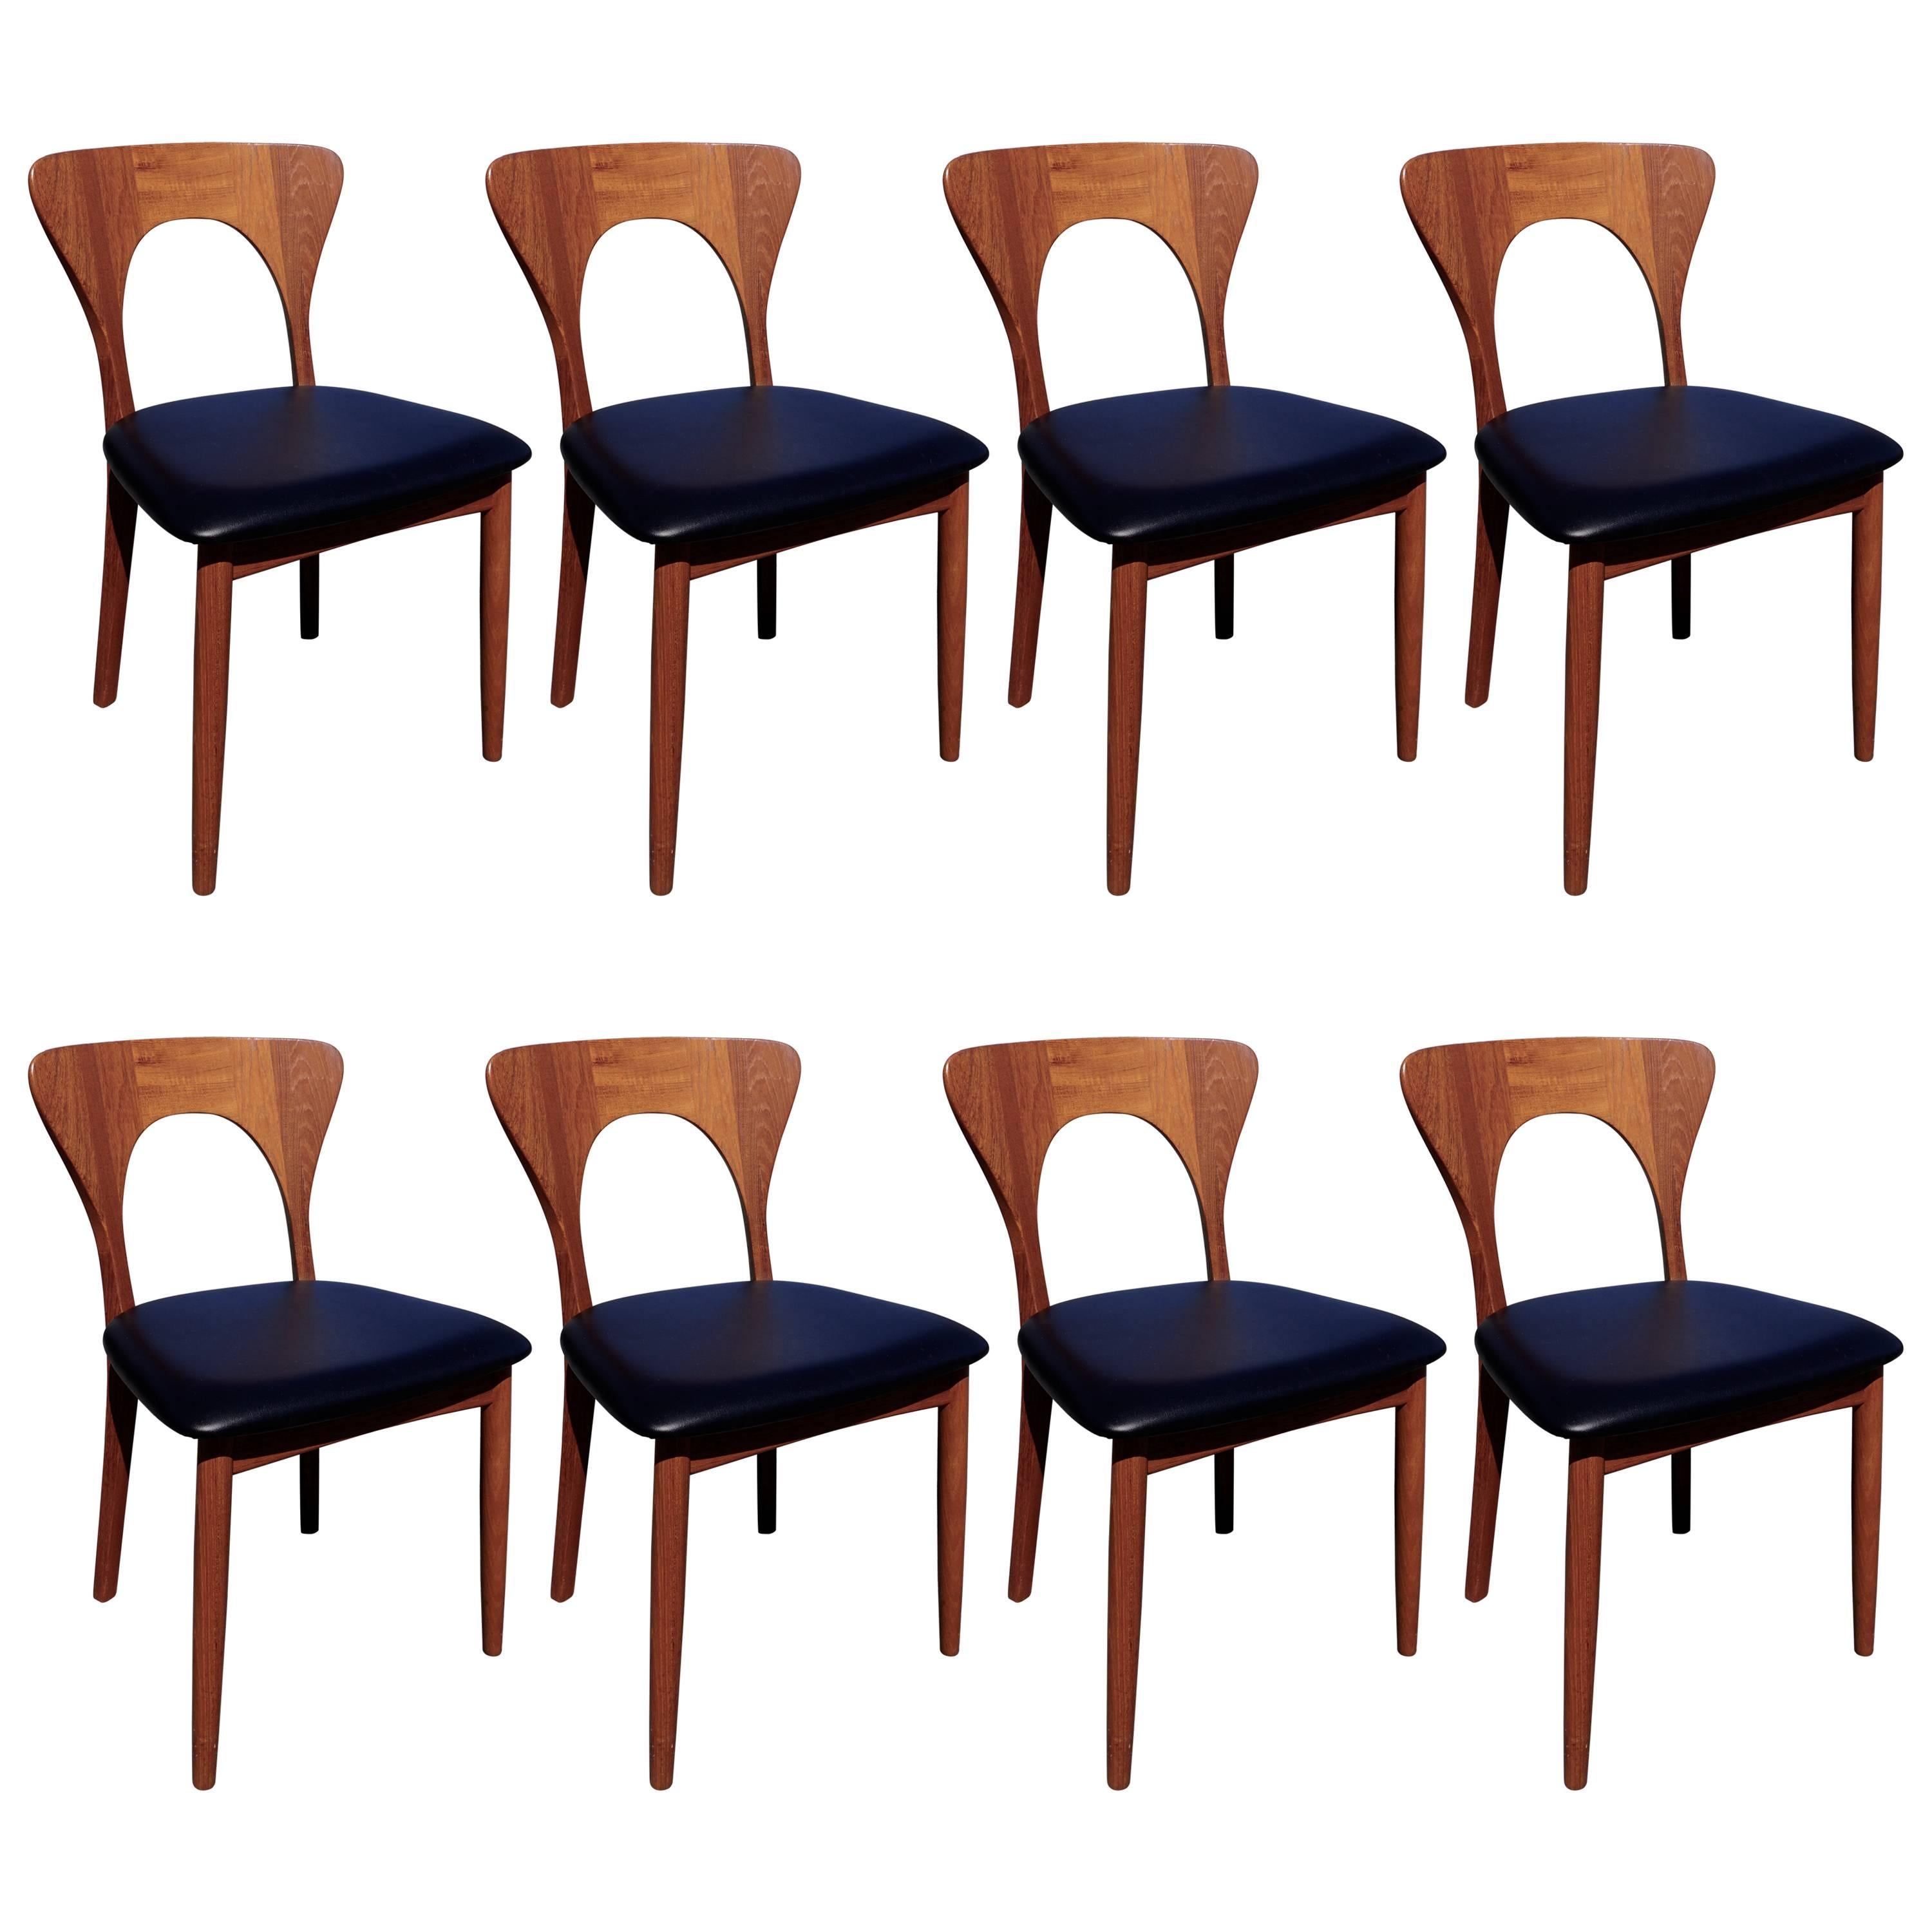 Neils Koefoed Set of Eight "Peter" Chairs